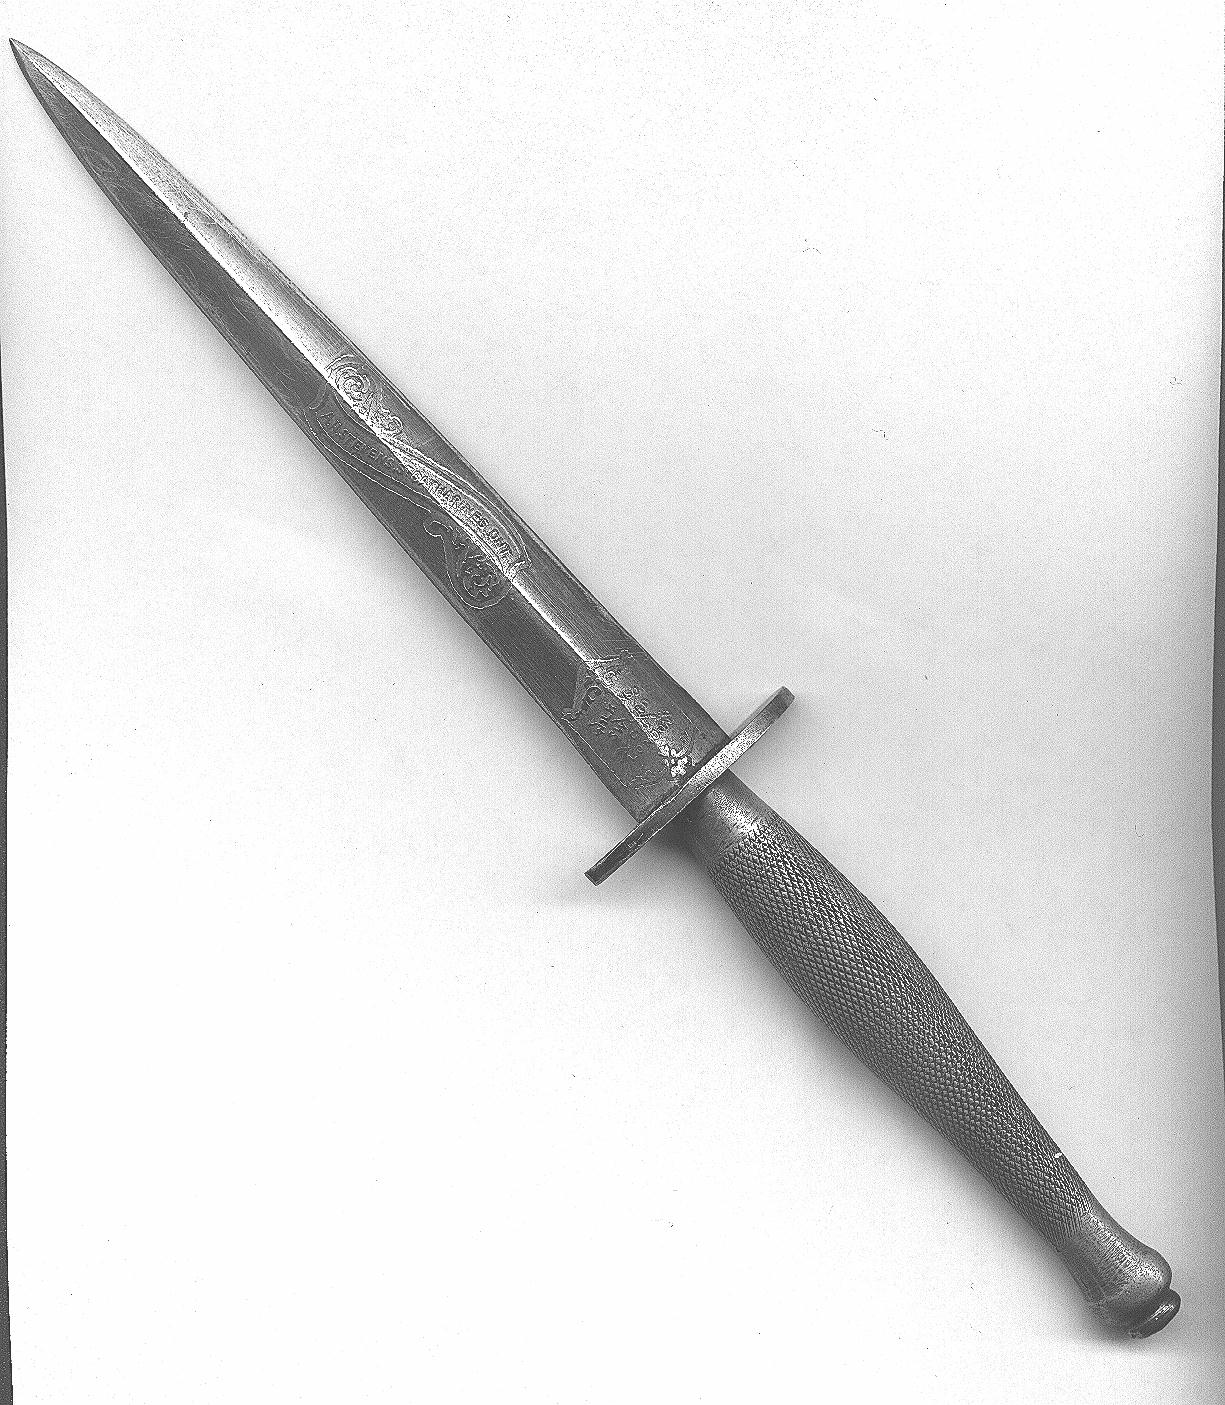 Fairbairn-Sykes Fighting Knife carried by Lieutenant A. H. Stevens of St. Catharines, Ontario. This is a knurled grip model, made by Wilkinson Sword, and with his name on the blade in a scroll. 